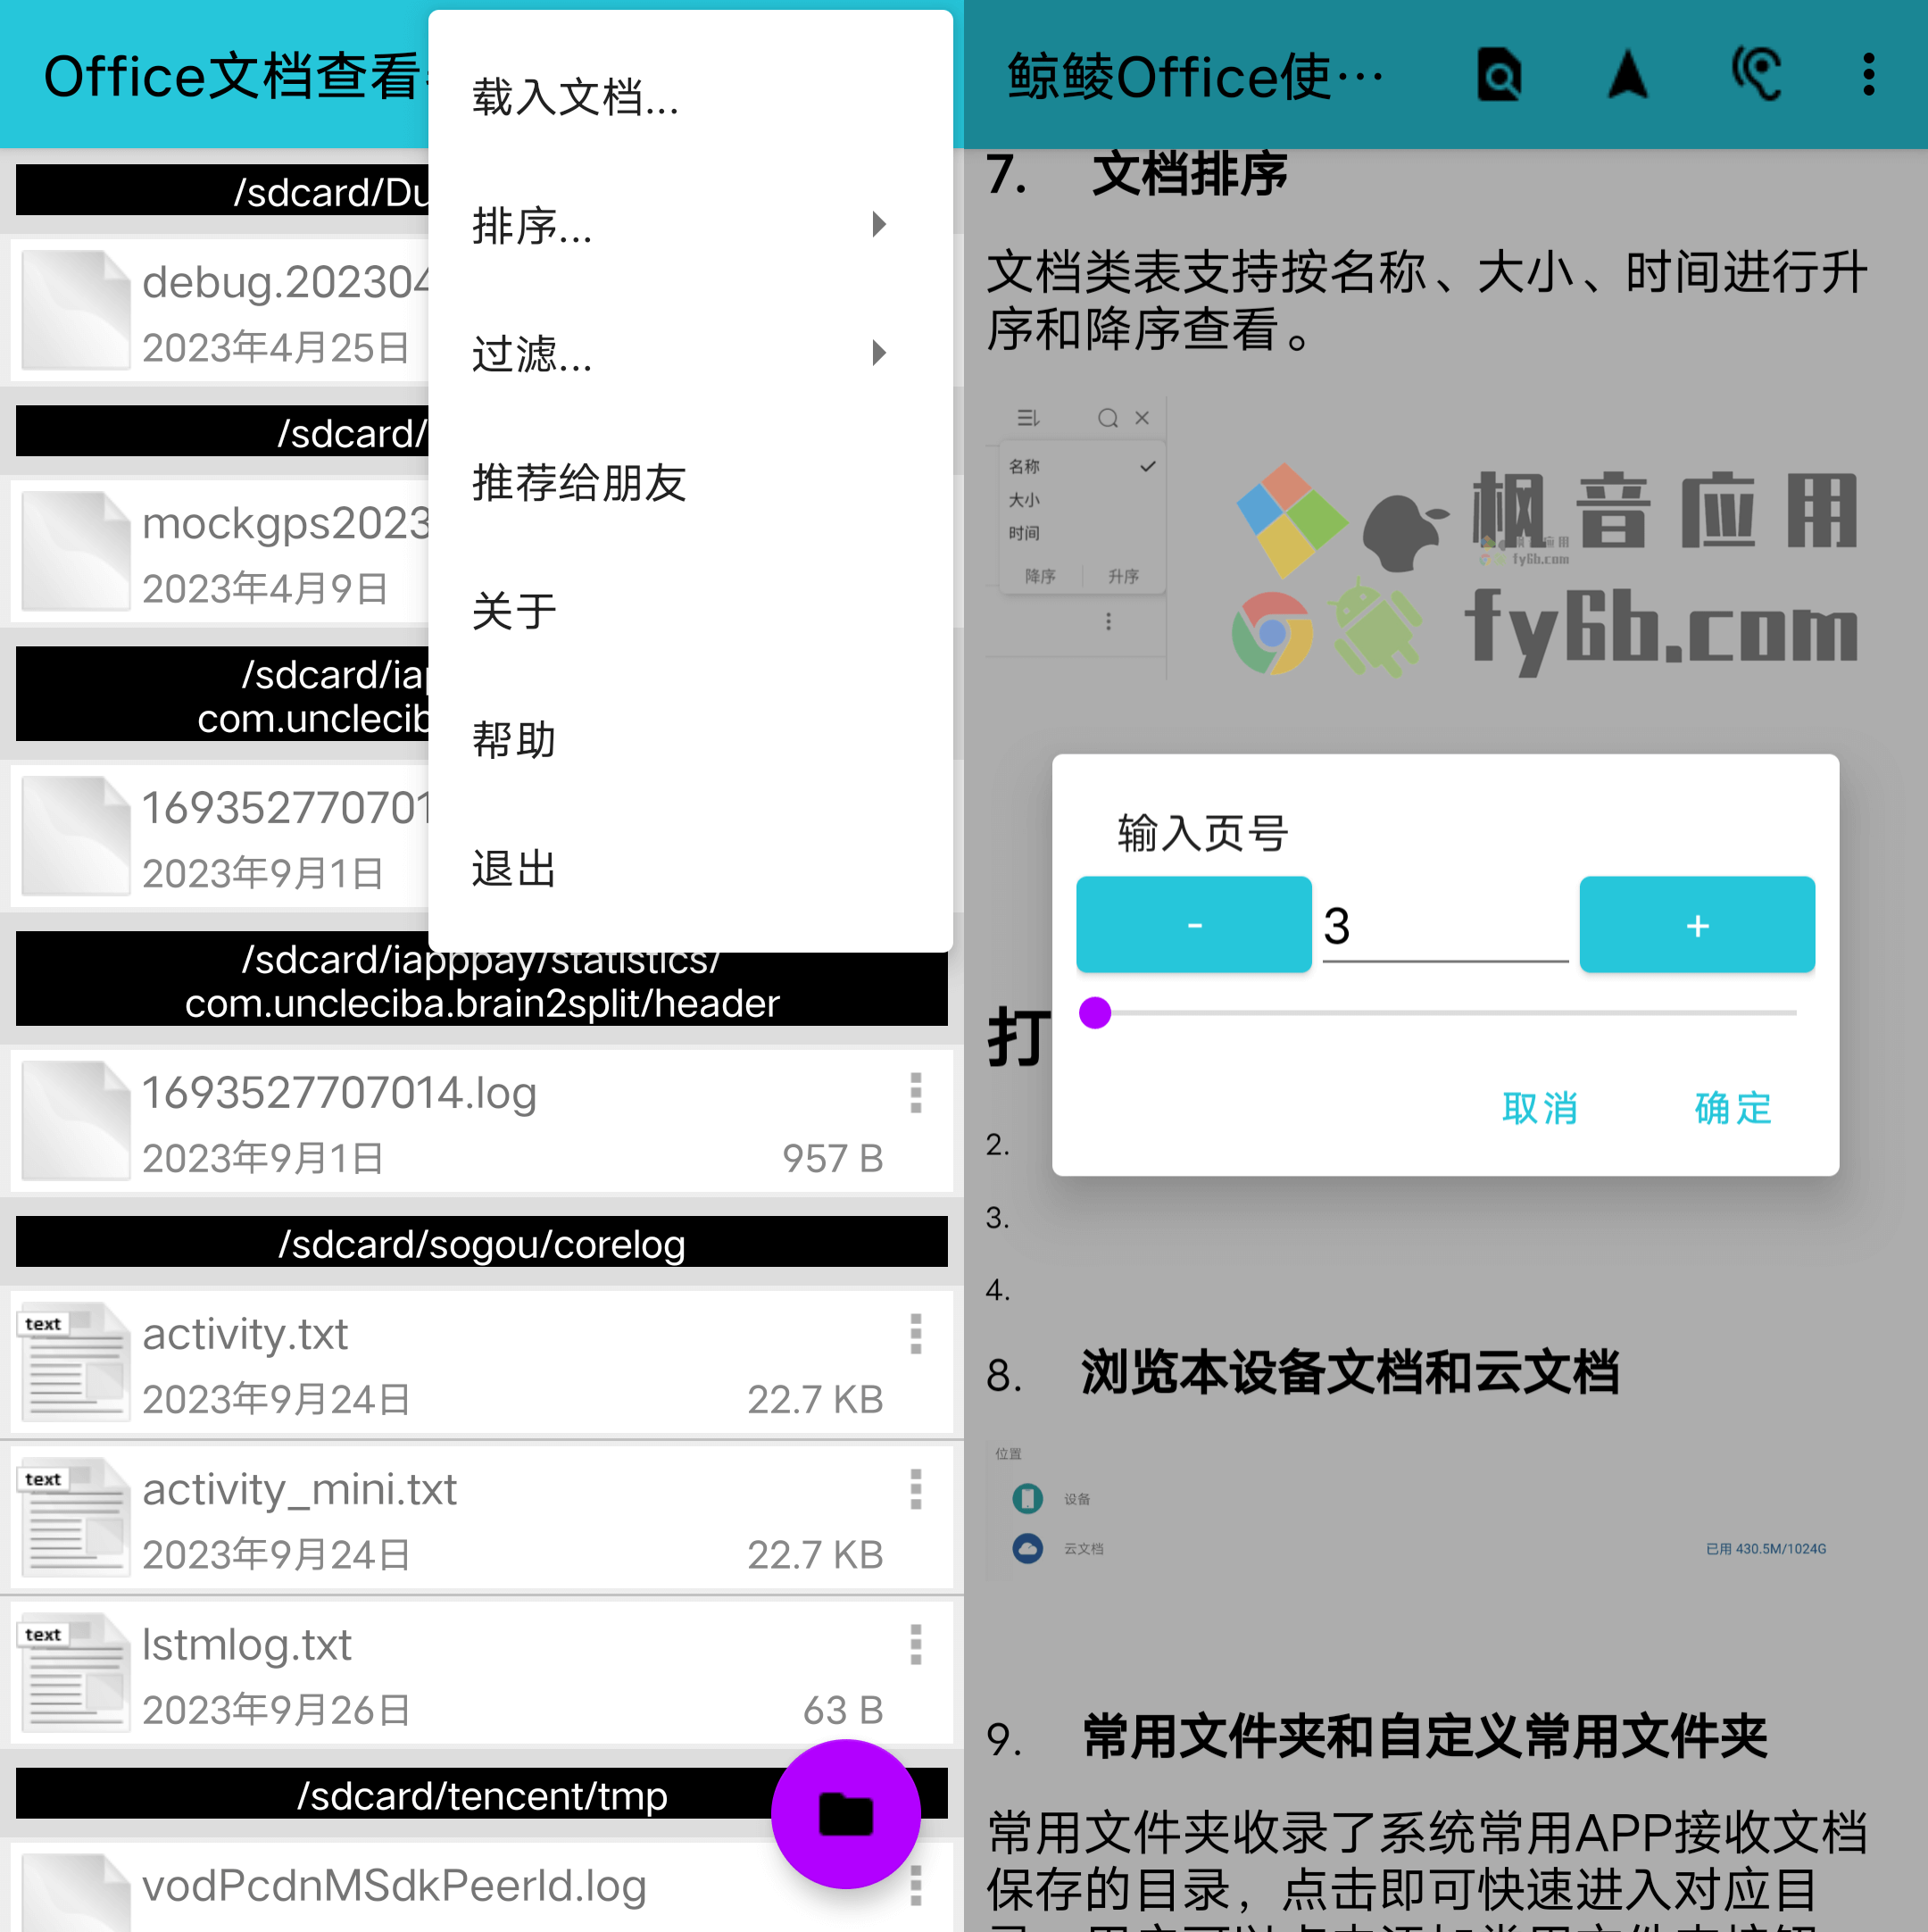 Android Office文档查看器 Office Documents Viewer_v1.36.10